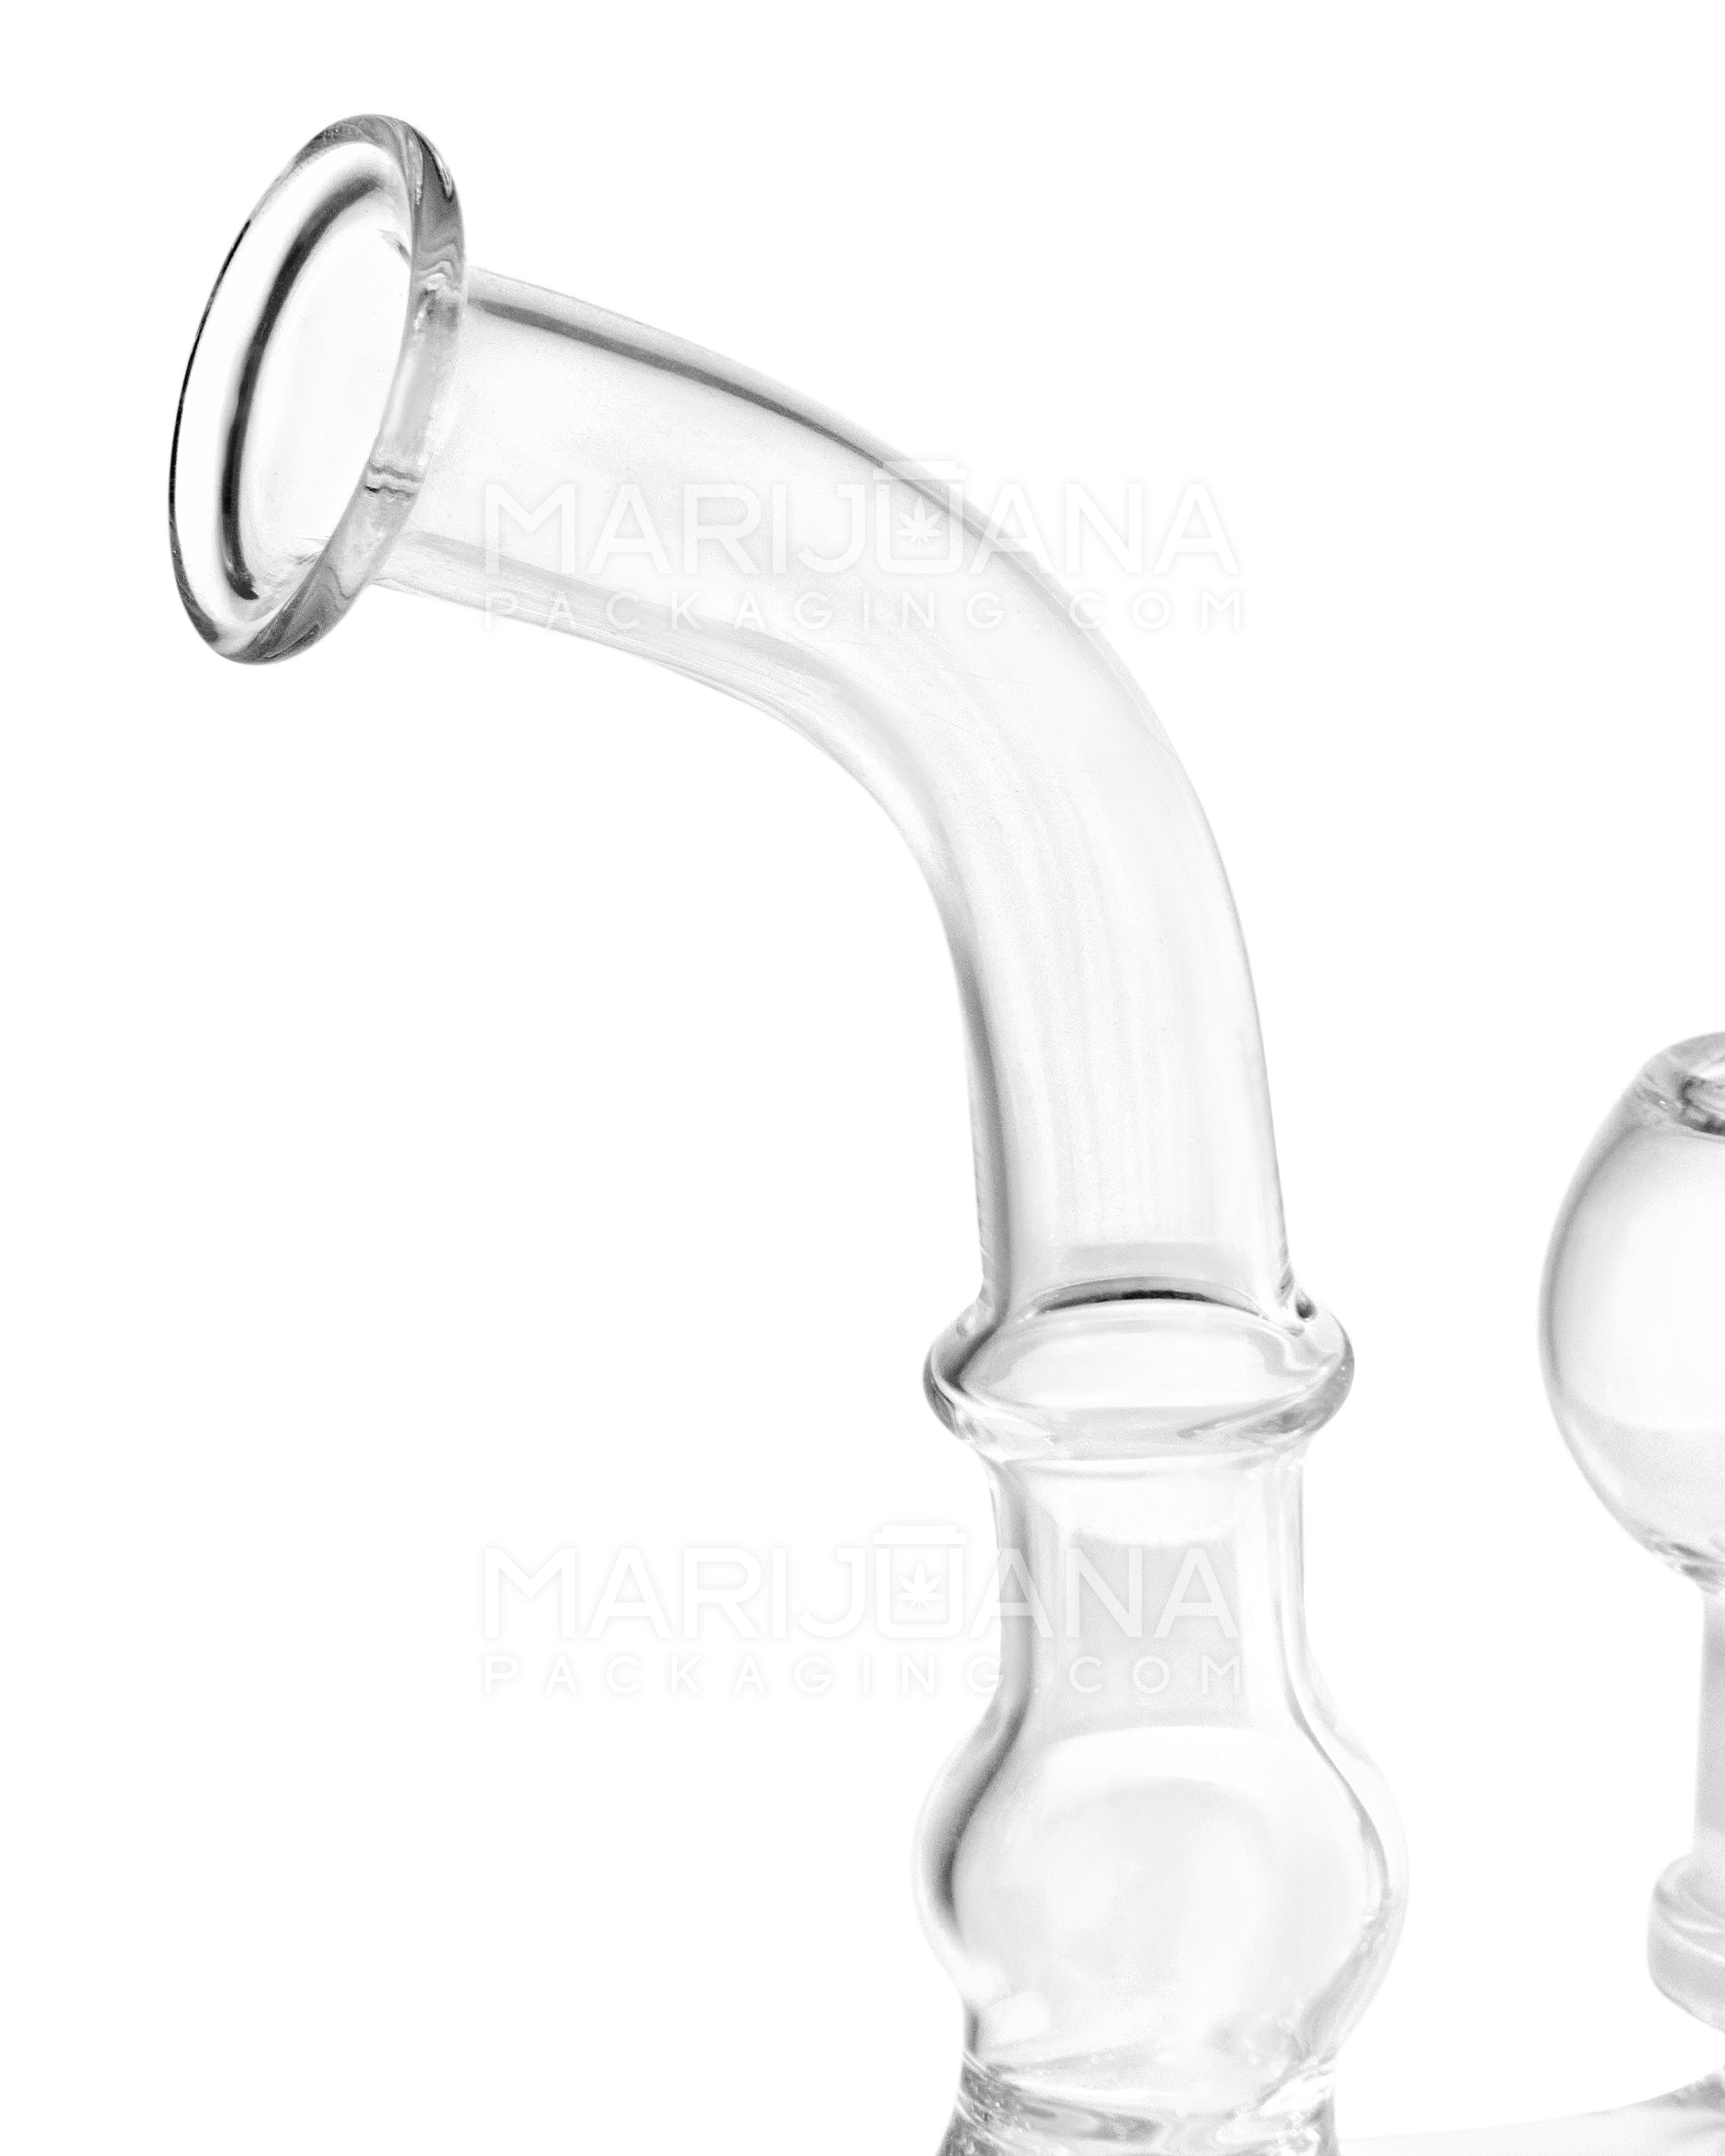 Bent Neck Barrel Glass Dab Rig | 6in Tall - 14mm Dome & Nail - Clear - 4